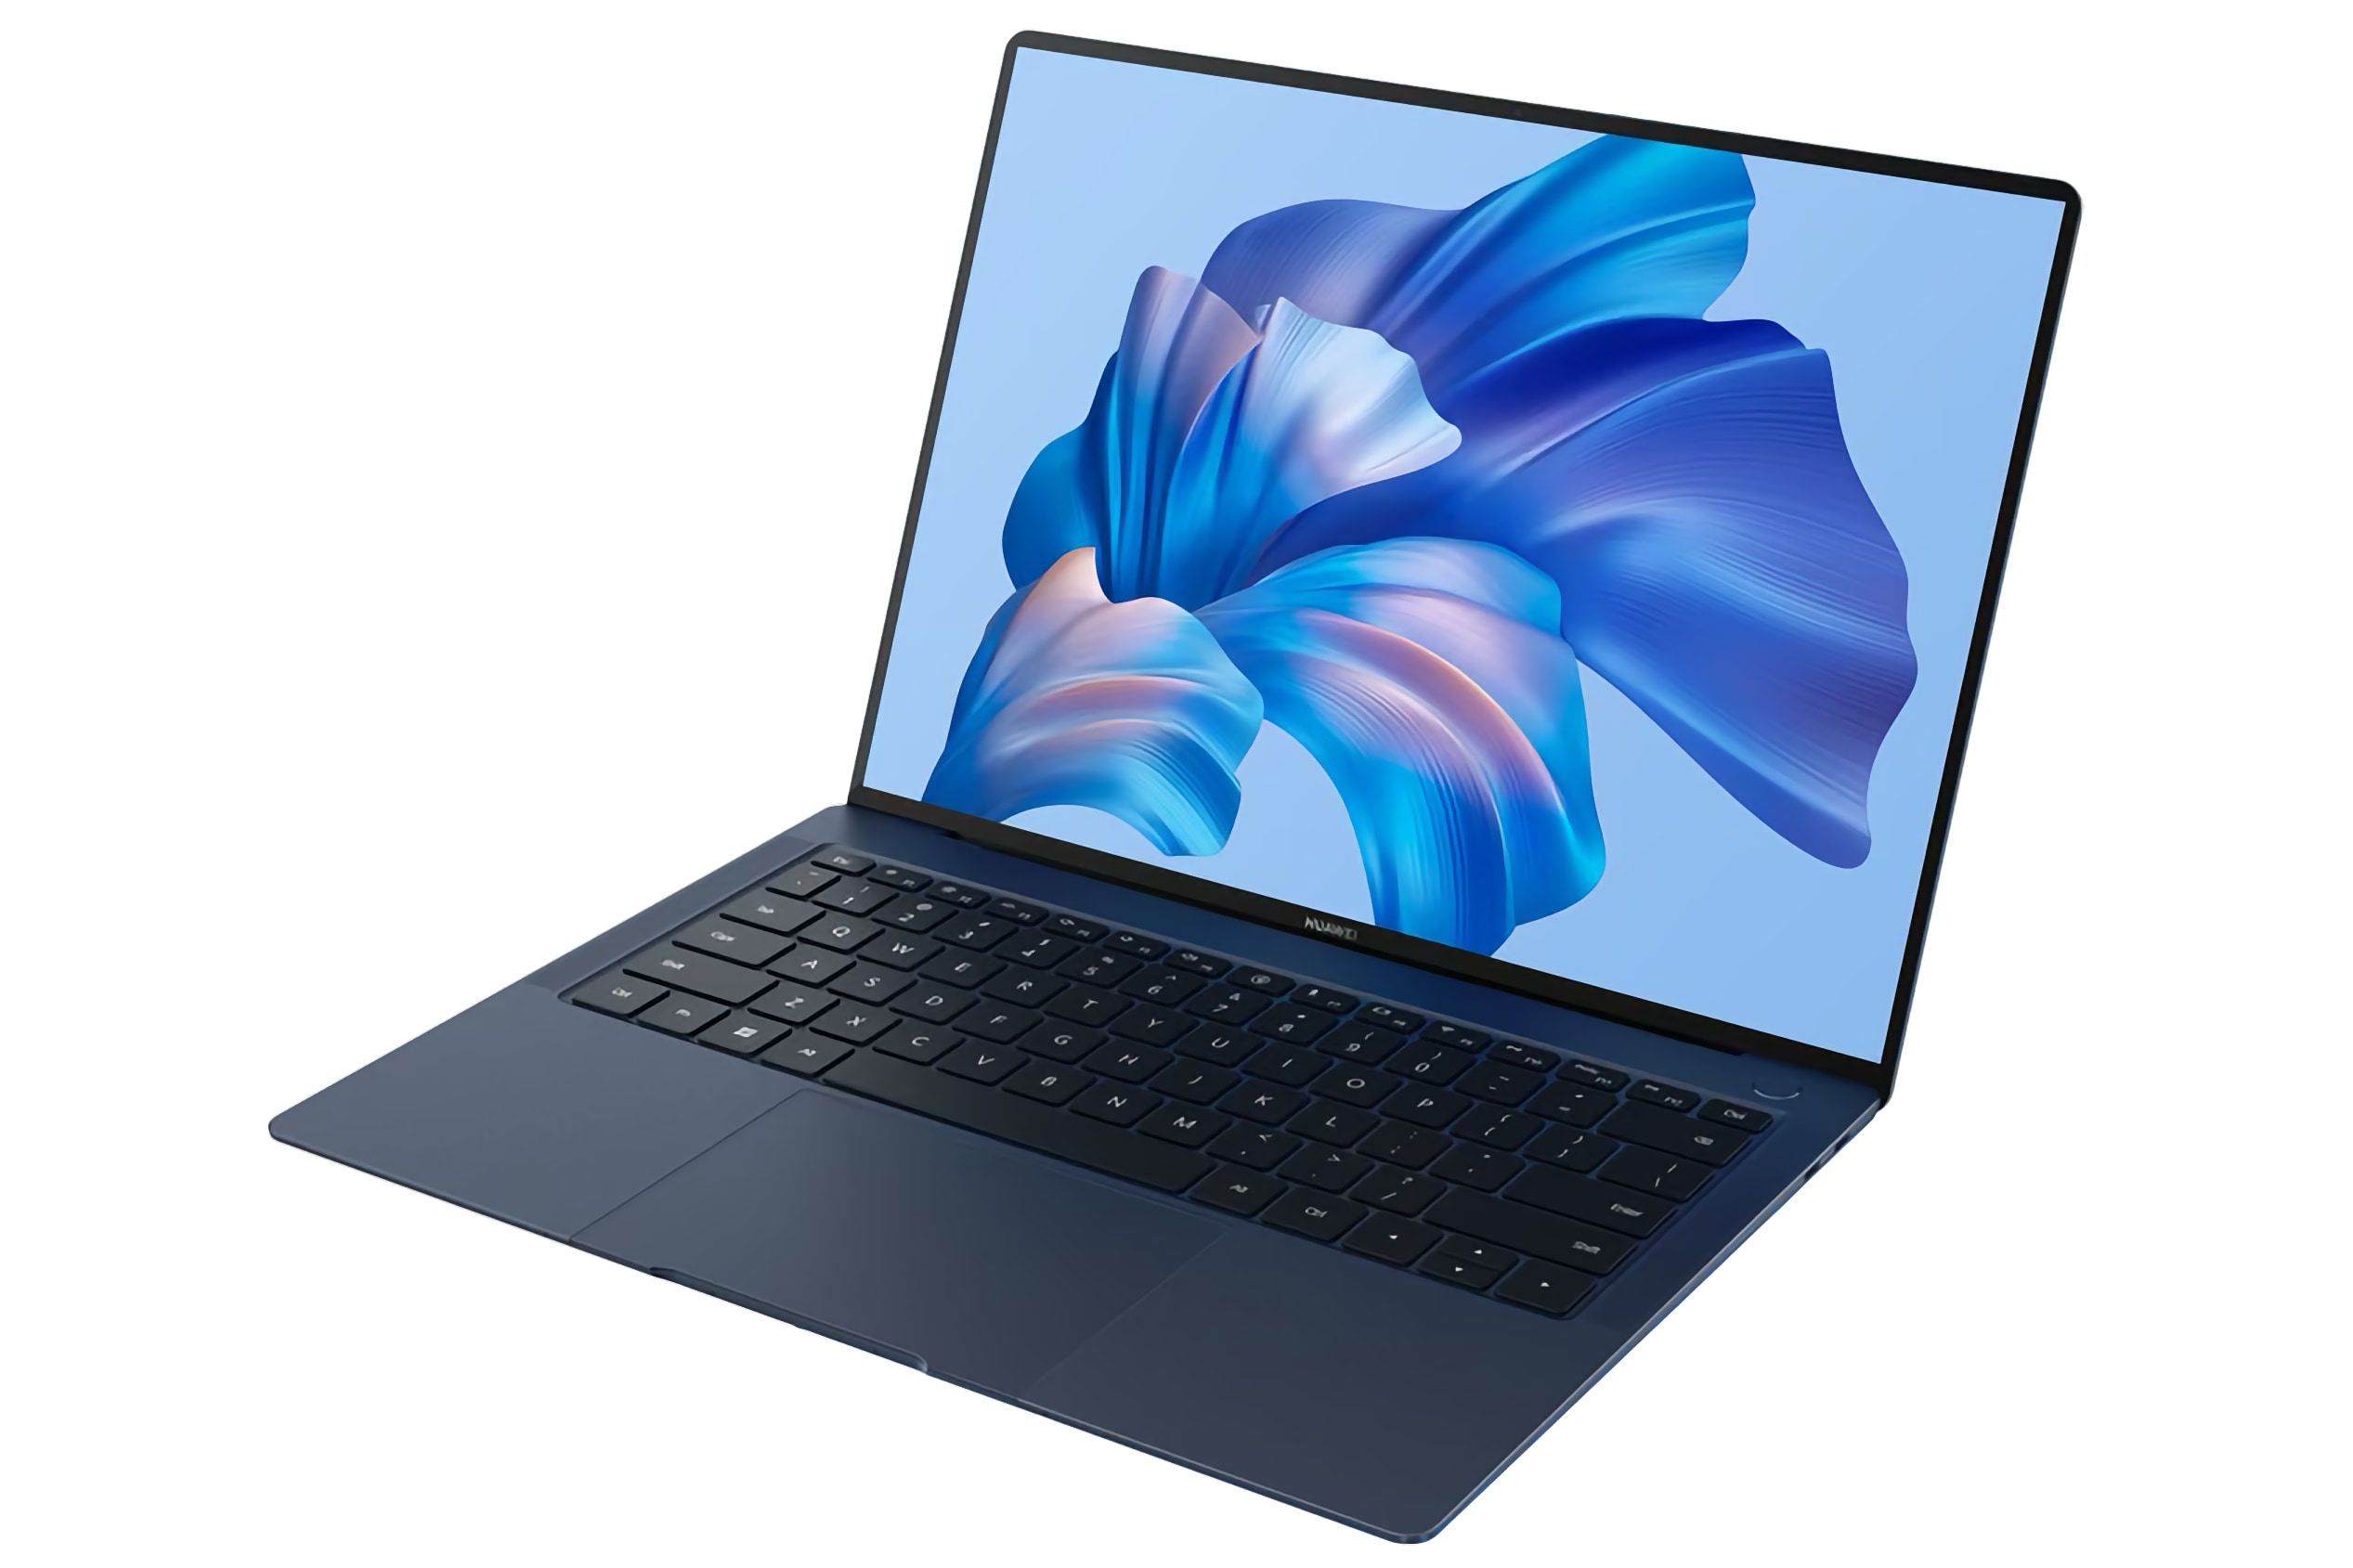 The new Huawei MateBook E is an interesting, but also expensive